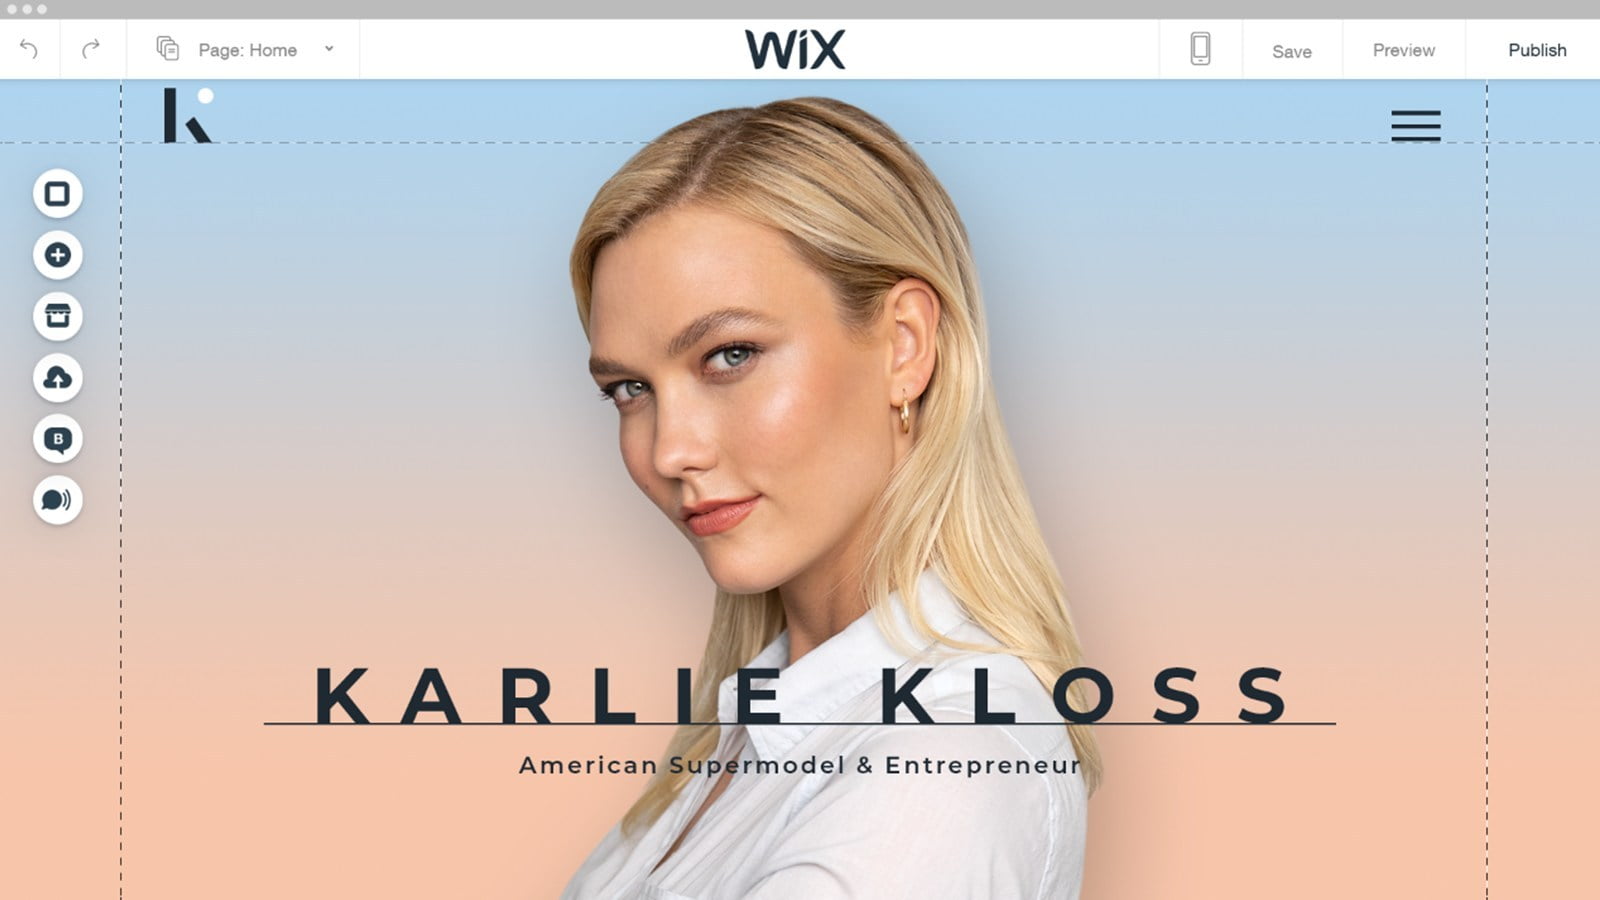 Wix Returns To The Super Bowl With Ad Featuring Karlie Kloss